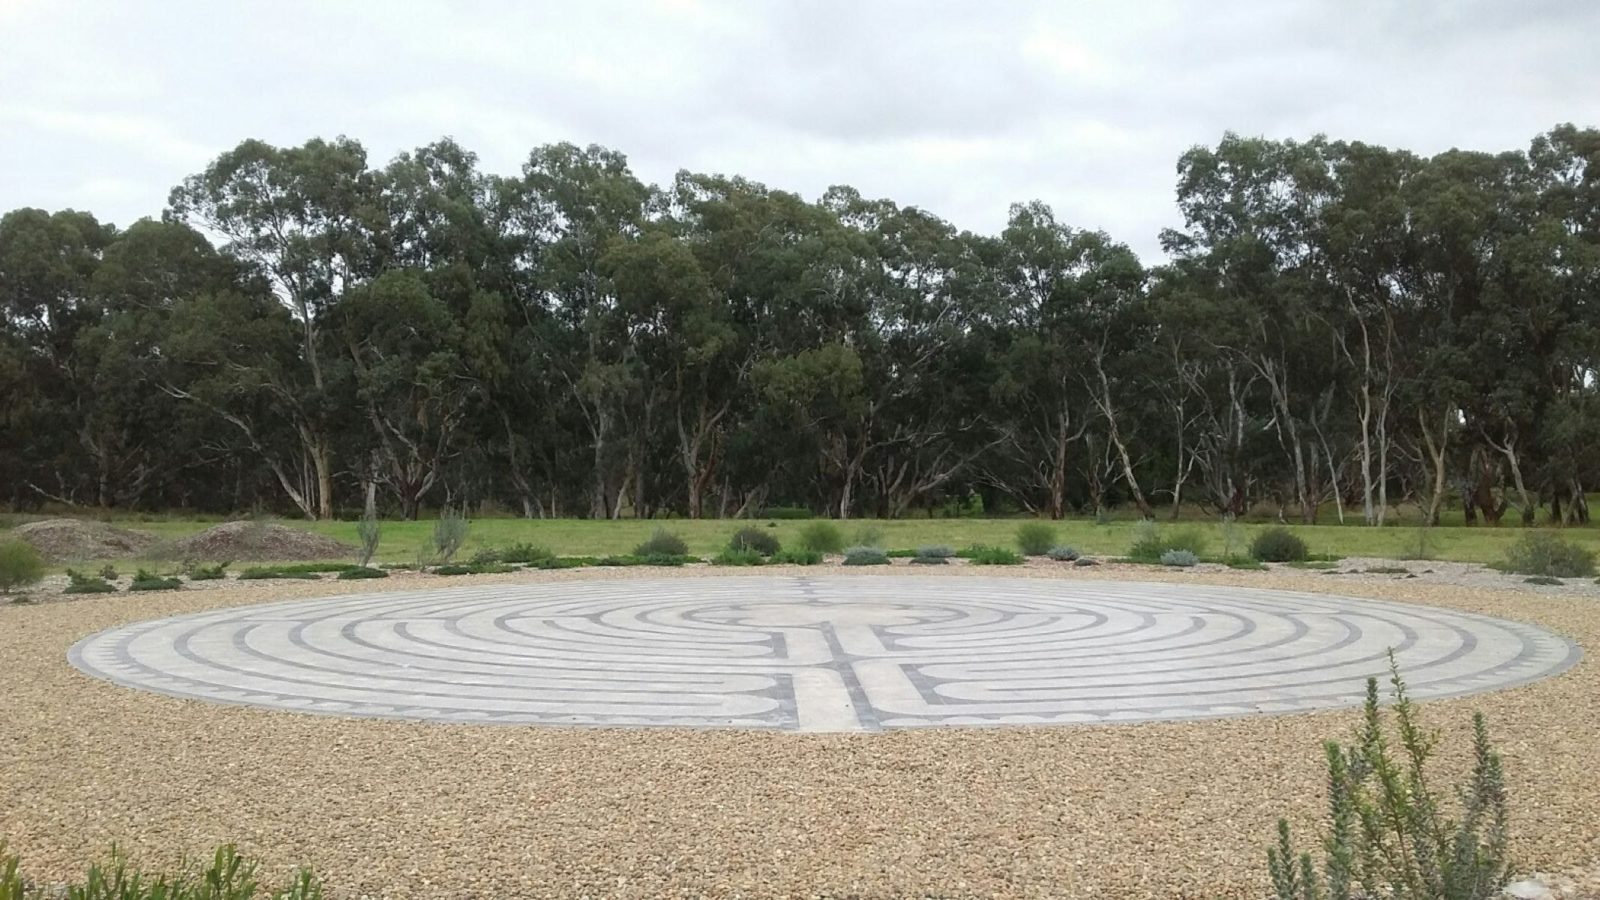 The photo shows a Chartres design labyrinth with a background of rever redgum trees